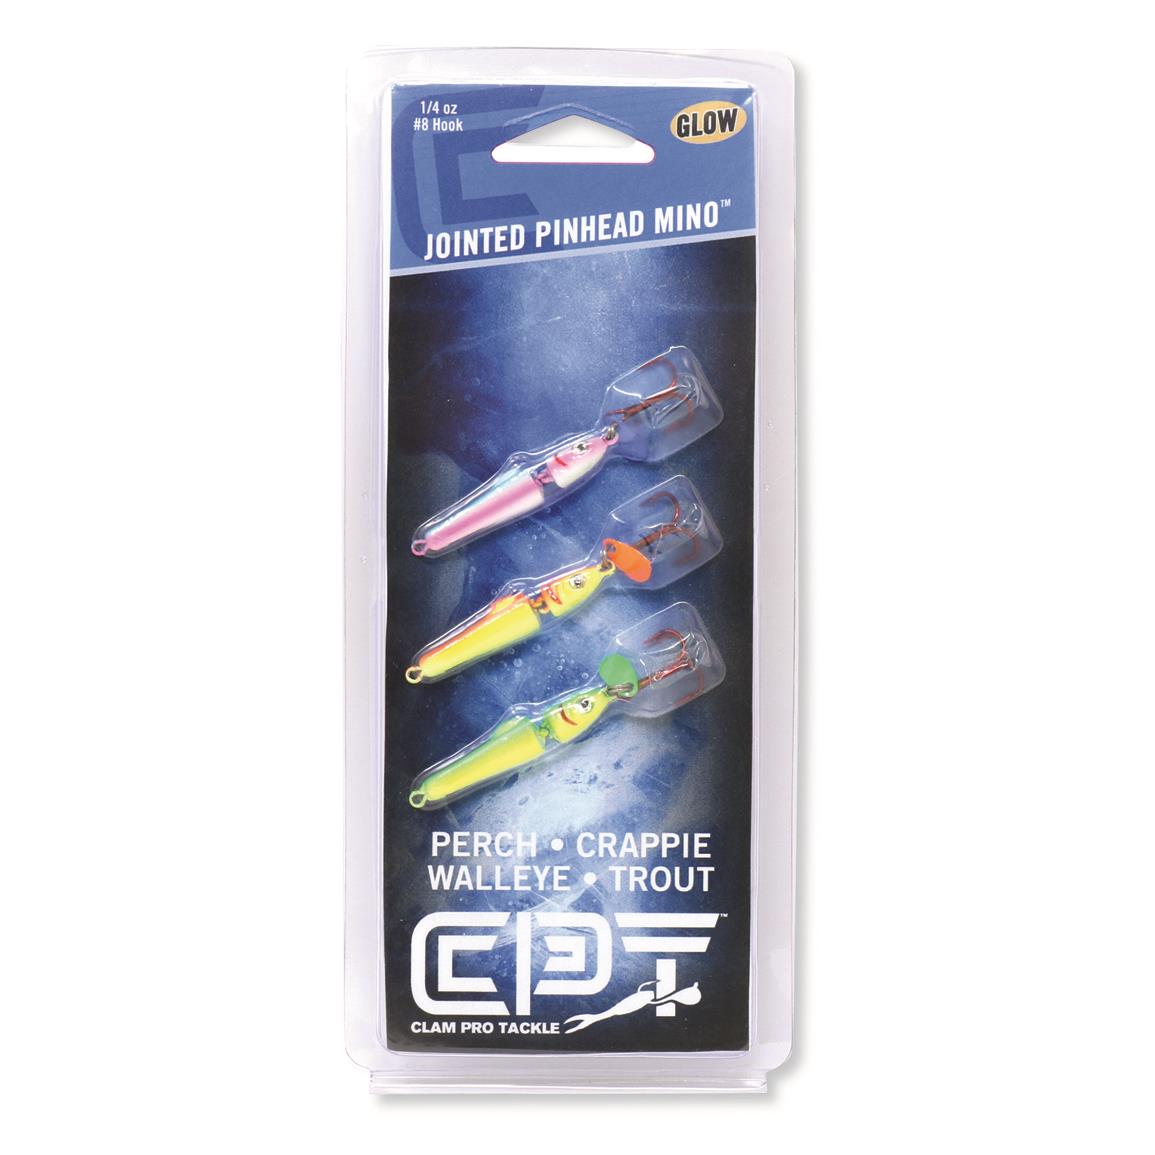 Clam Pro Tackle Jointed Pinhead Jigging Mino Spoon Kit, 1/8 oz.